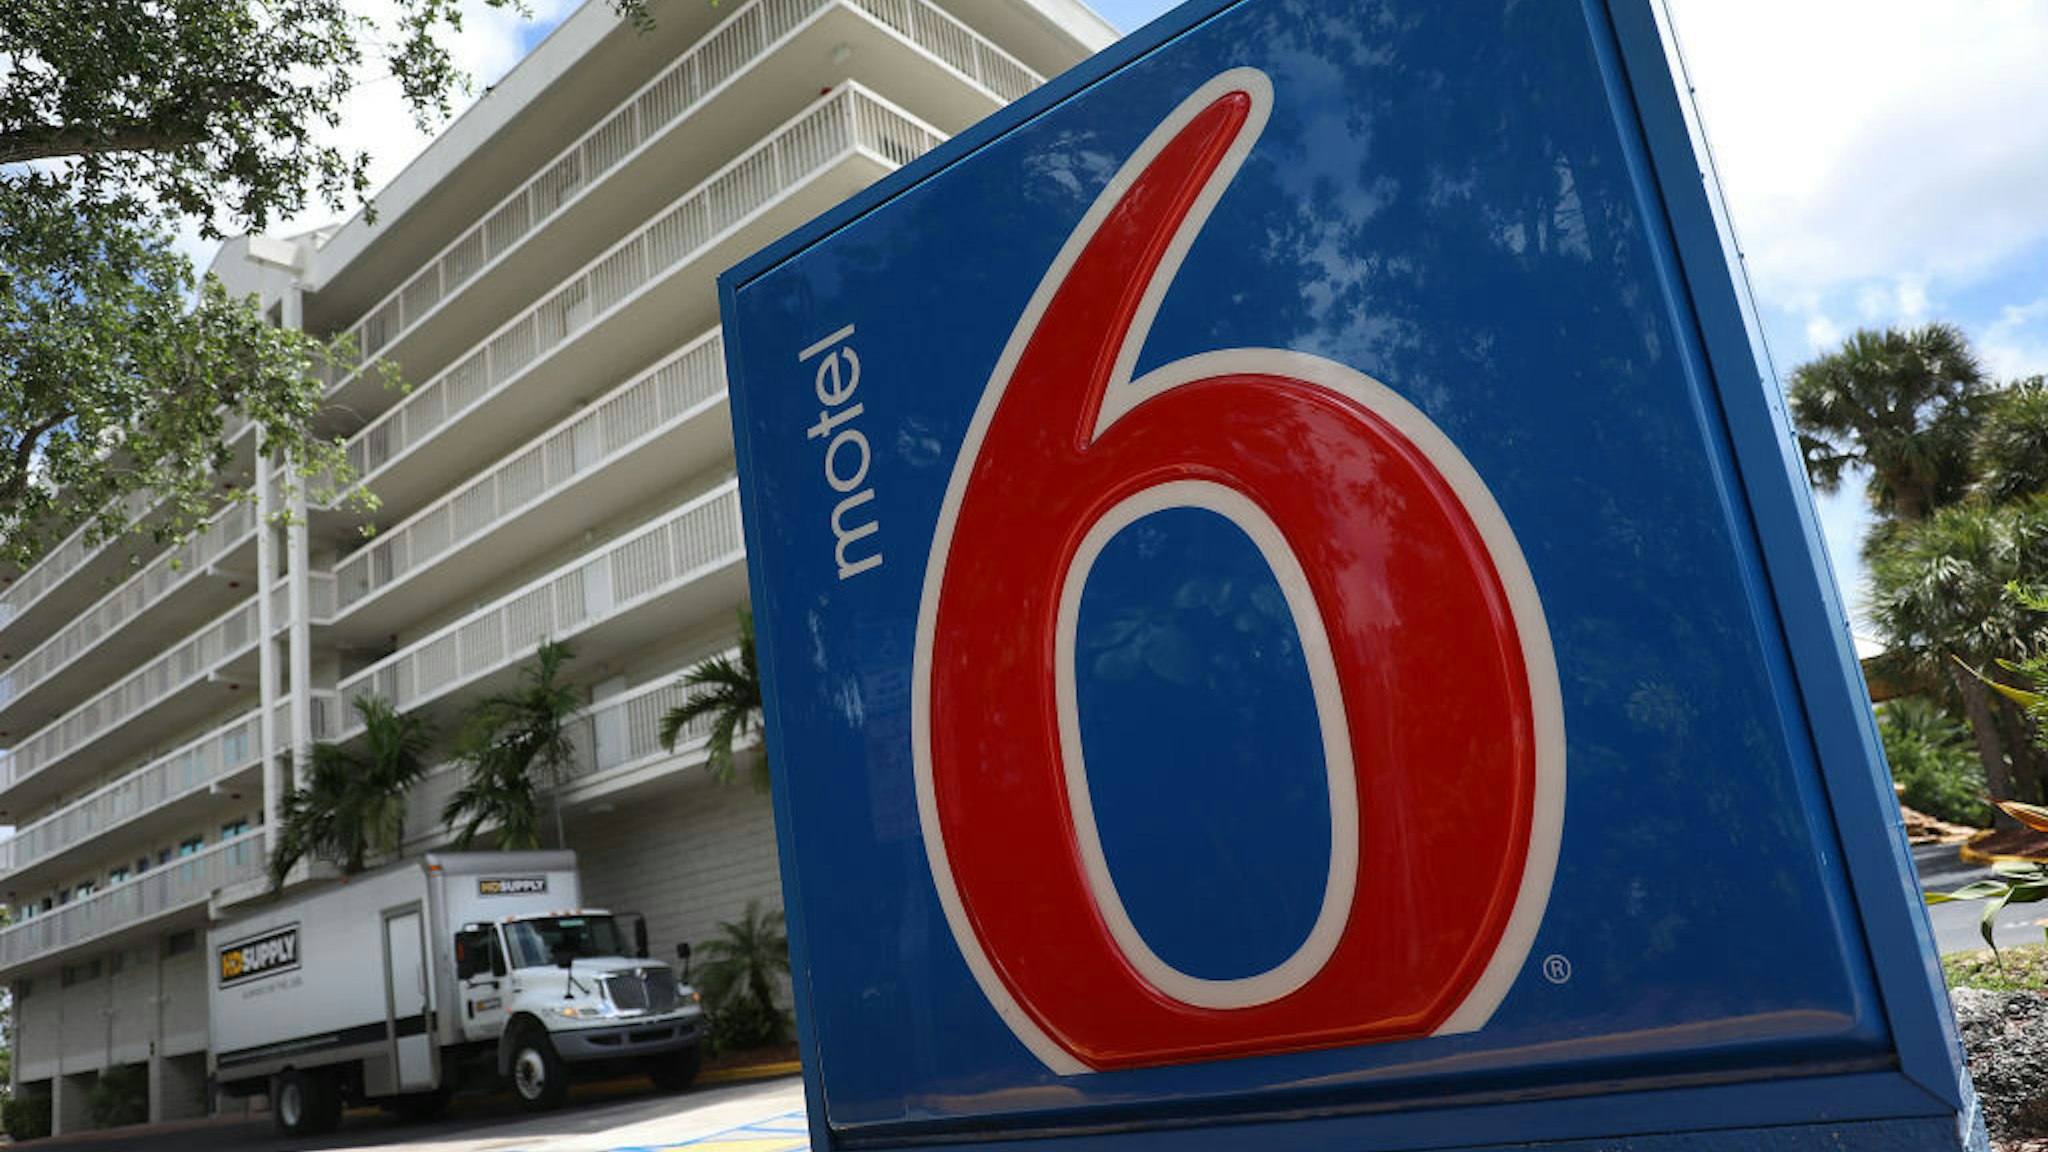 A Motel 6 is seen on April 08, 2019 in Cutler Bay, United States. Motel 6 has agreed to pay a $12 million settlement after the state of Washington sued the chain for providing customer information to U.S. Immigration and Customs Enforcement agents. (Photo by Joe Raedle/Getty Images)